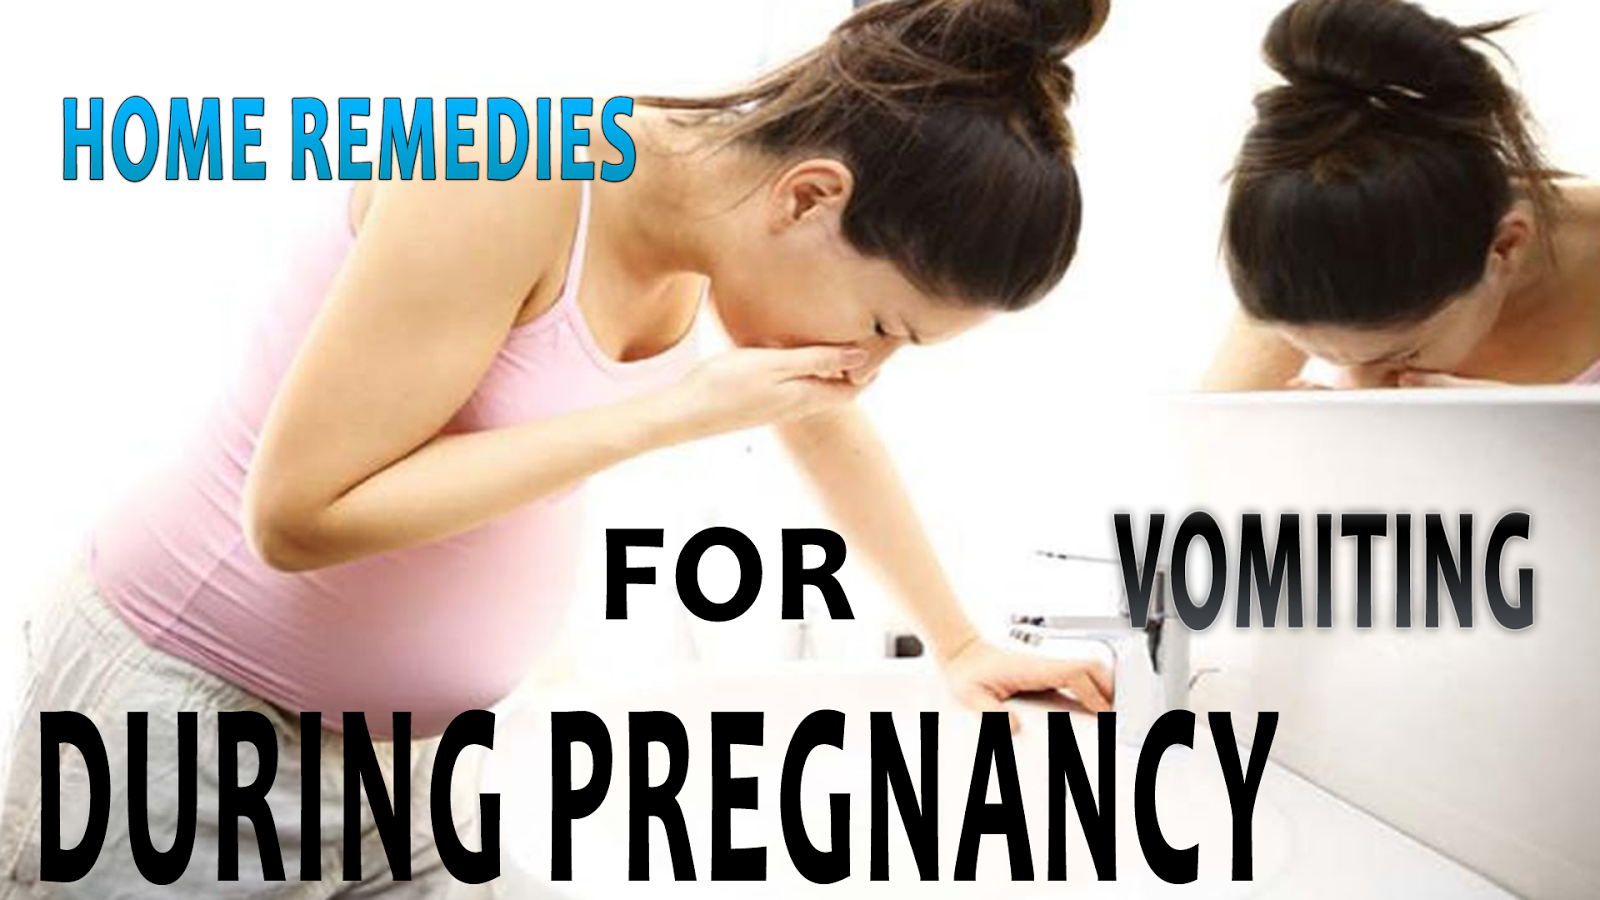 Home Remedies for Vomiting During Pregnancy